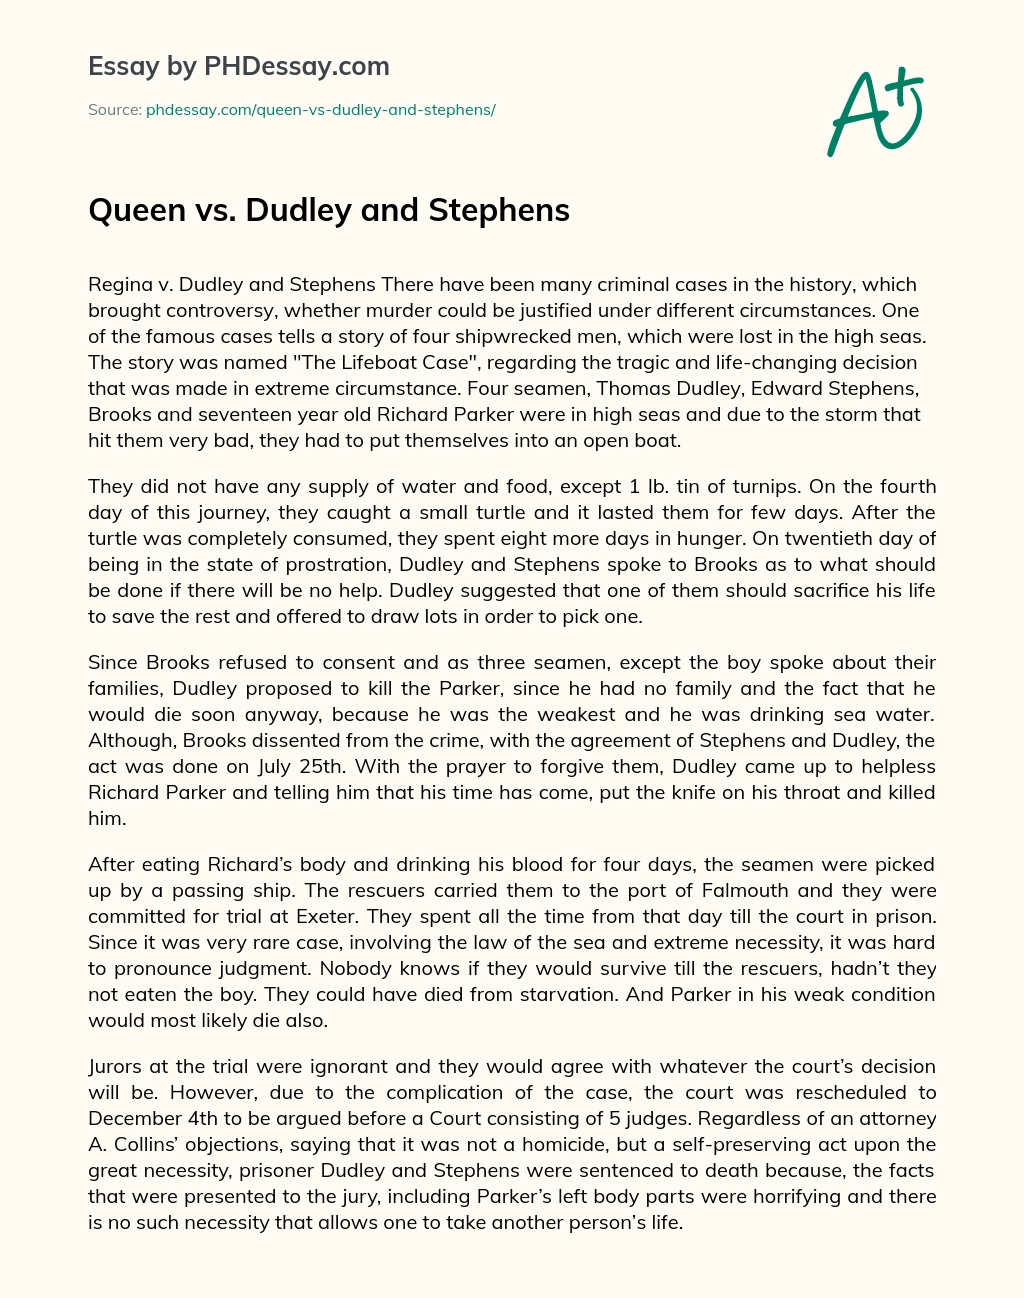 queen v dudley and stephens